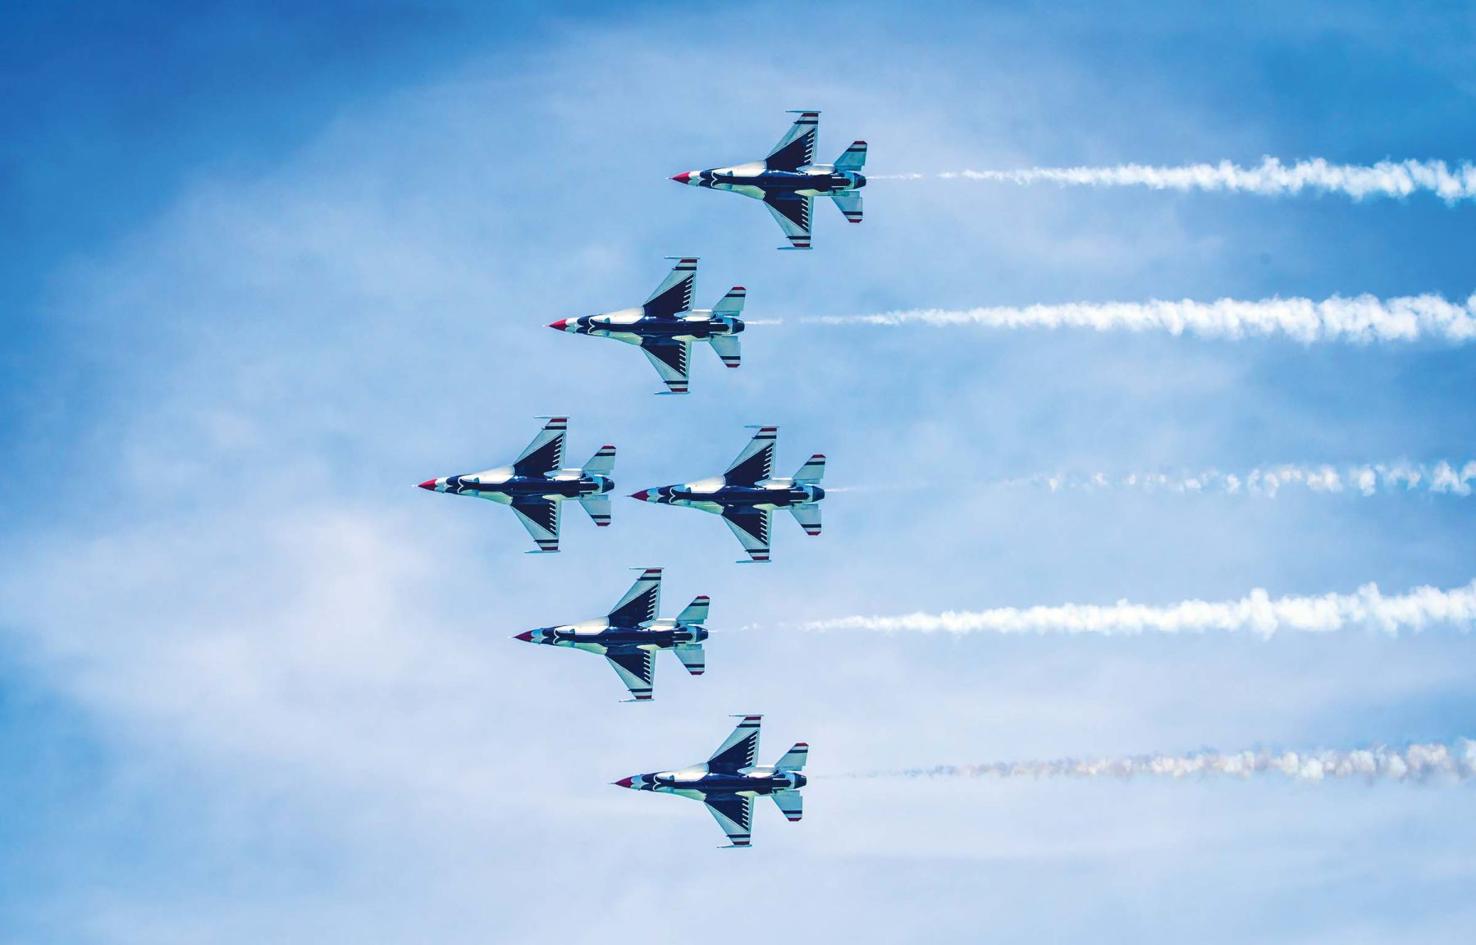 Large crowd expected for Ocean City Air Show News